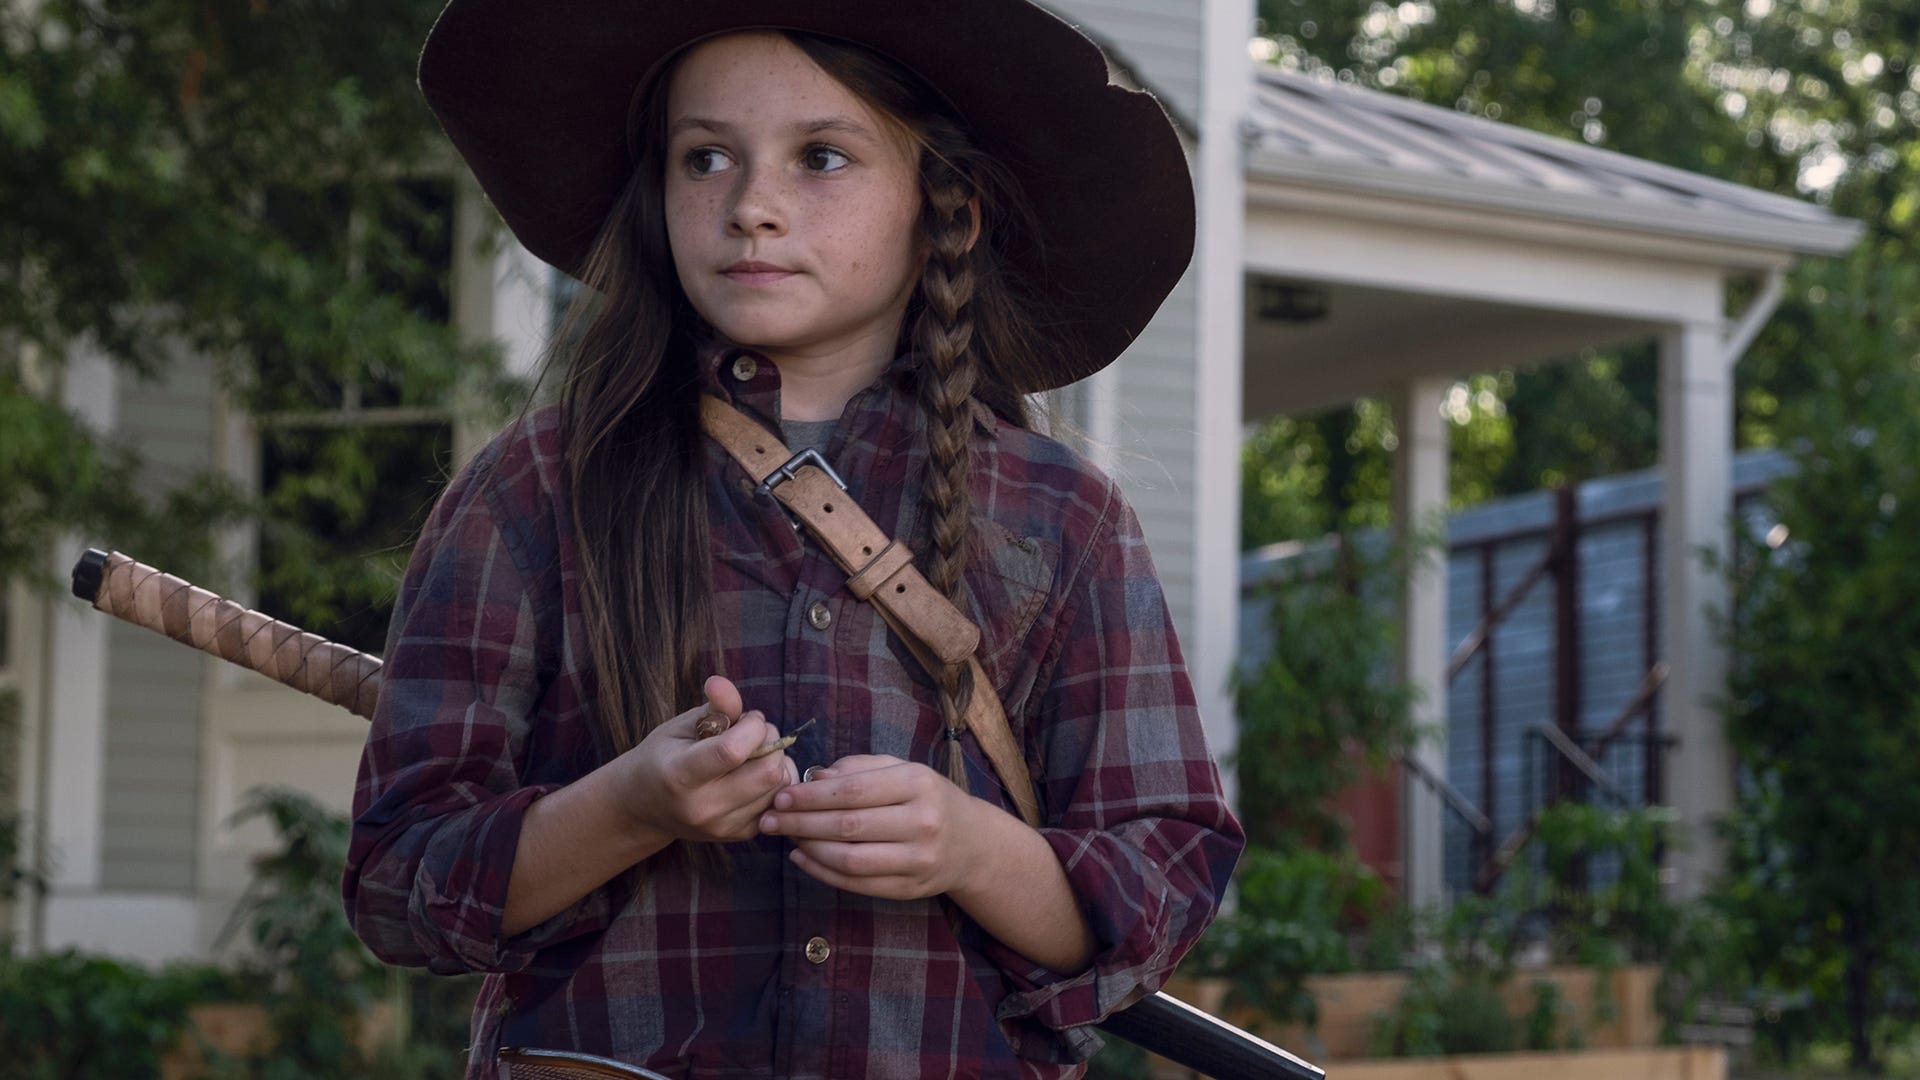 Cailey Fleming as Judith Grimes, The Walking Dead